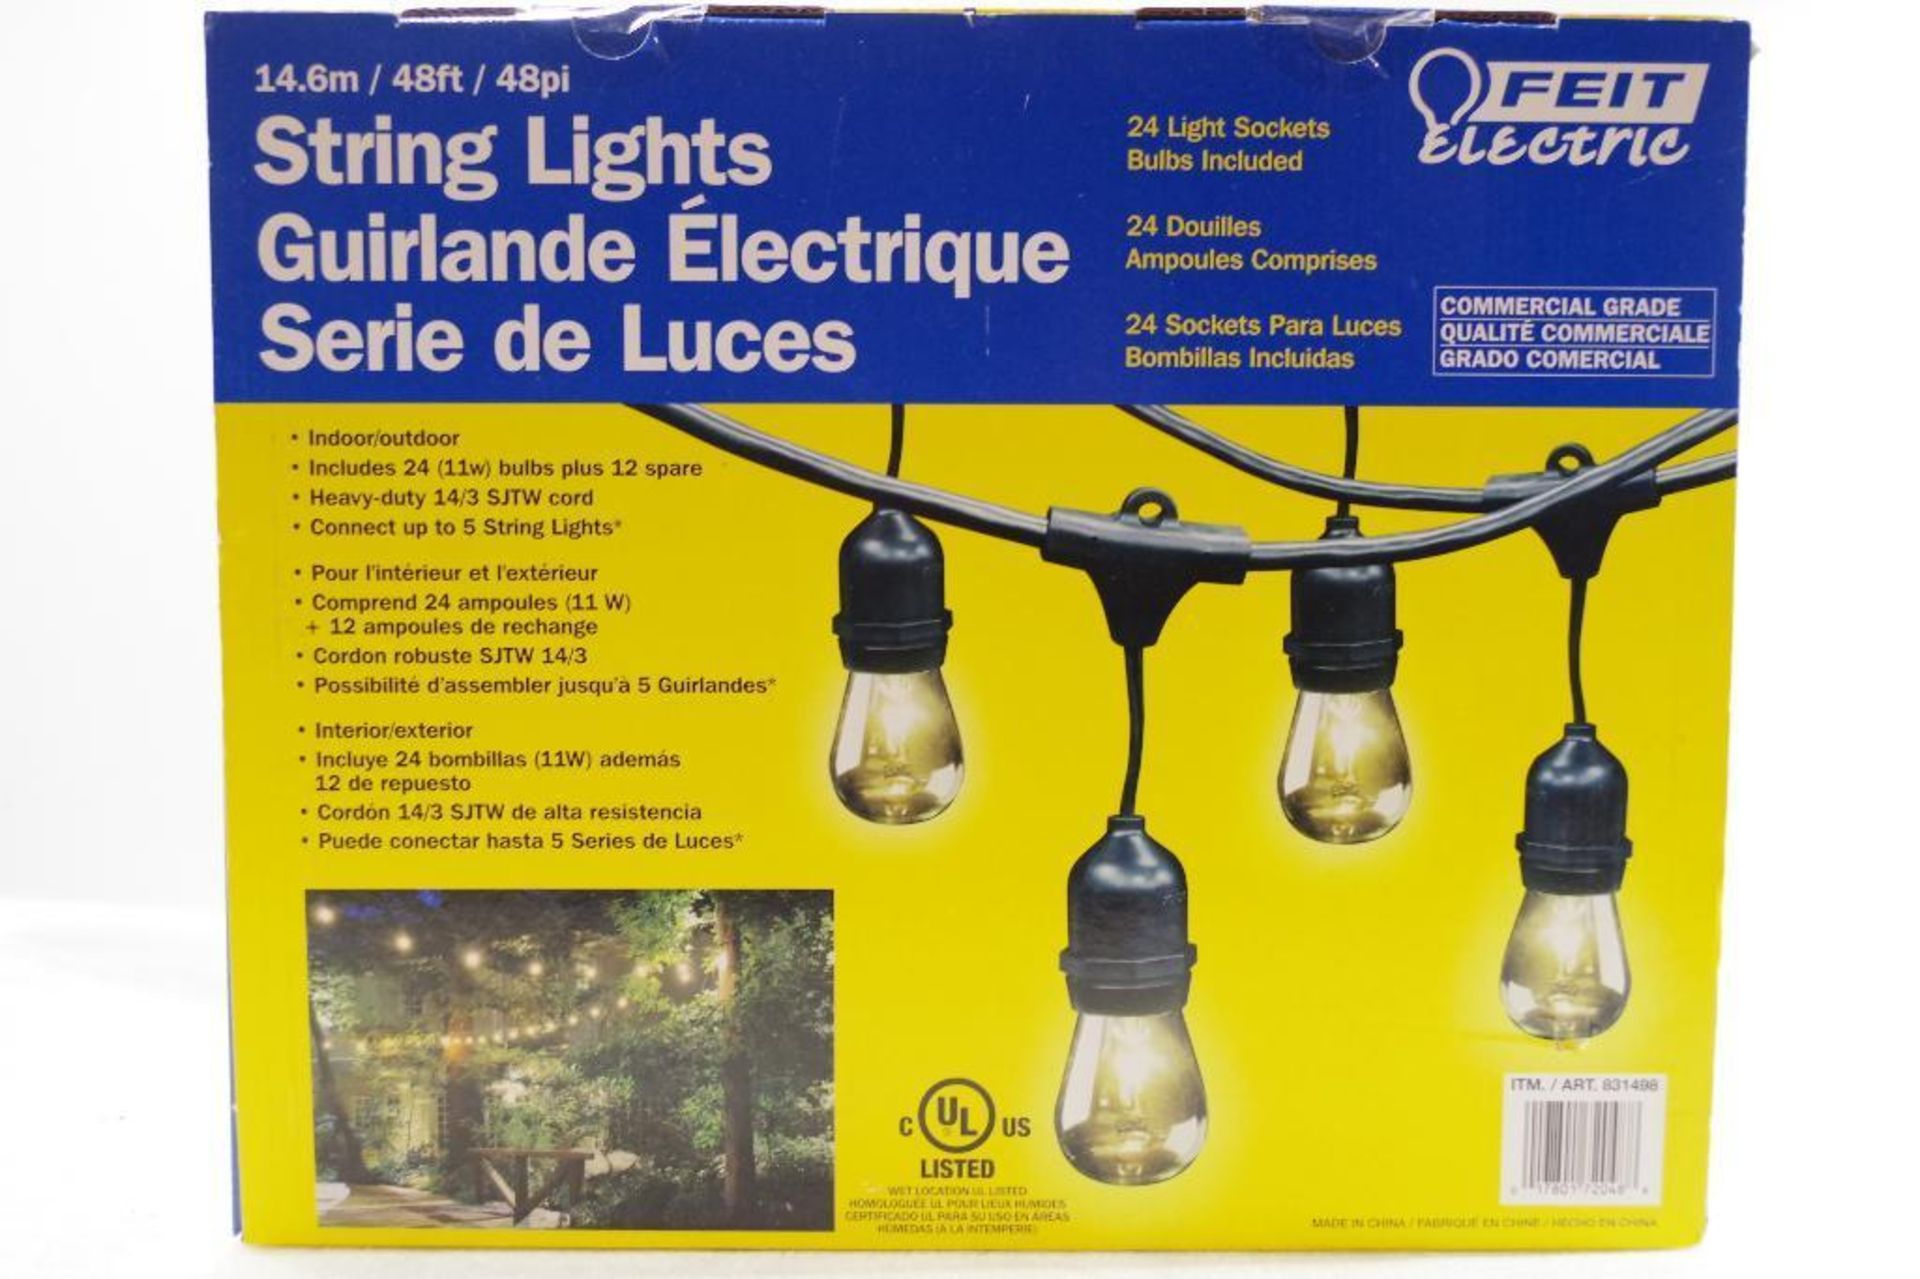 FEIT ELECTRIC 48 ft. Commercial Grade String Lights